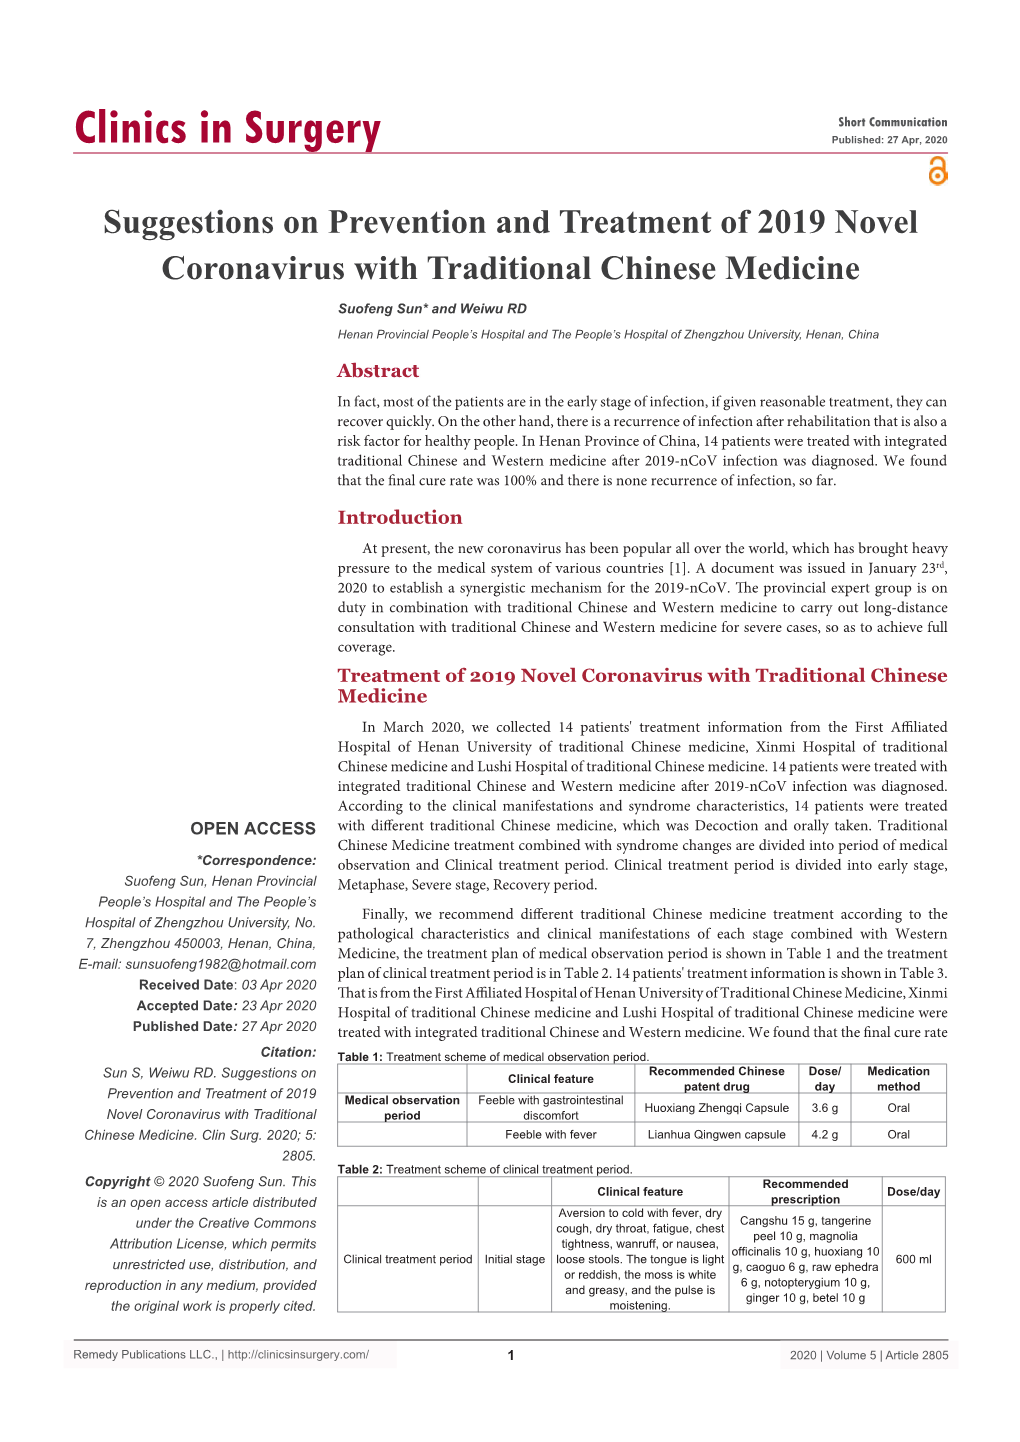 Suggestions on Prevention and Treatment of 2019 Novel Coronavirus with Traditional Chinese Medicine